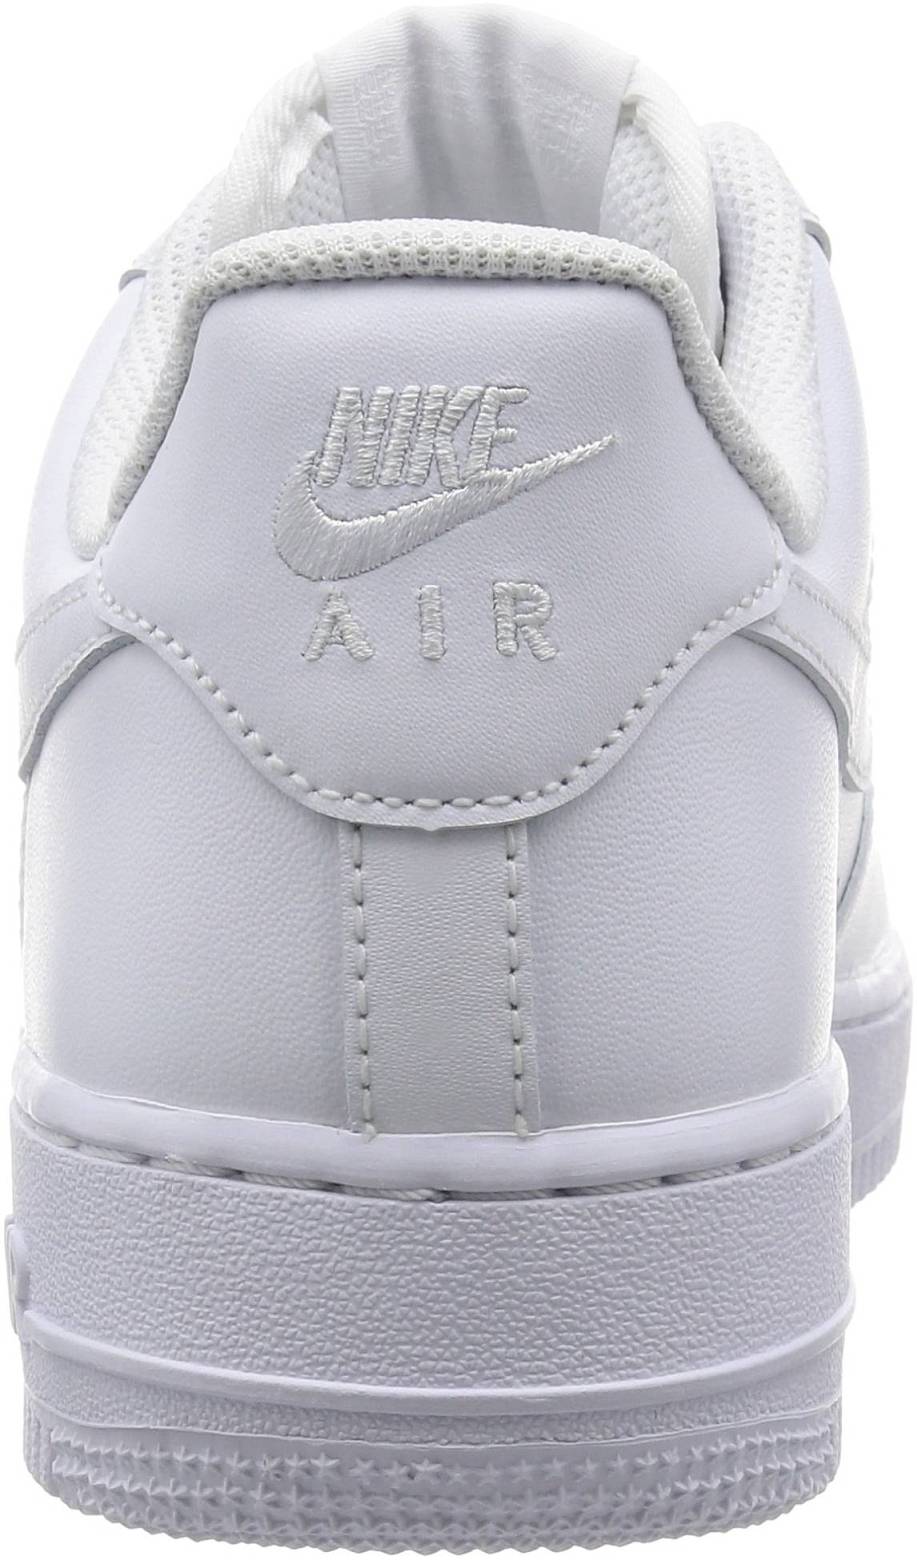 Nike Air Force 1 07 – Shoes Reviews & Reasons To Buy